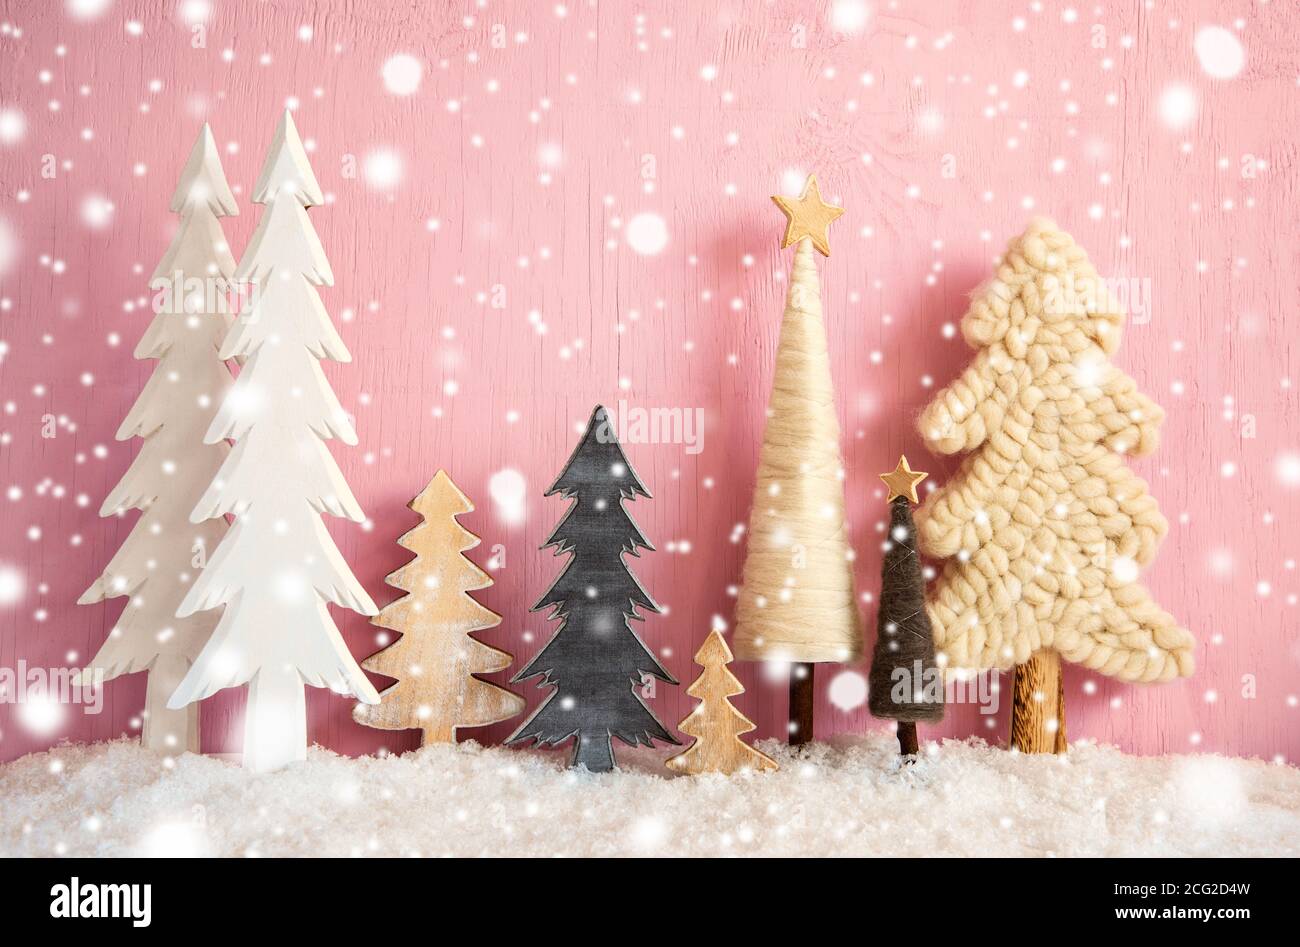 Christmas Trees, Snow, Pink Grungy Wooden Background, Star, Snowflakes Stock Photo